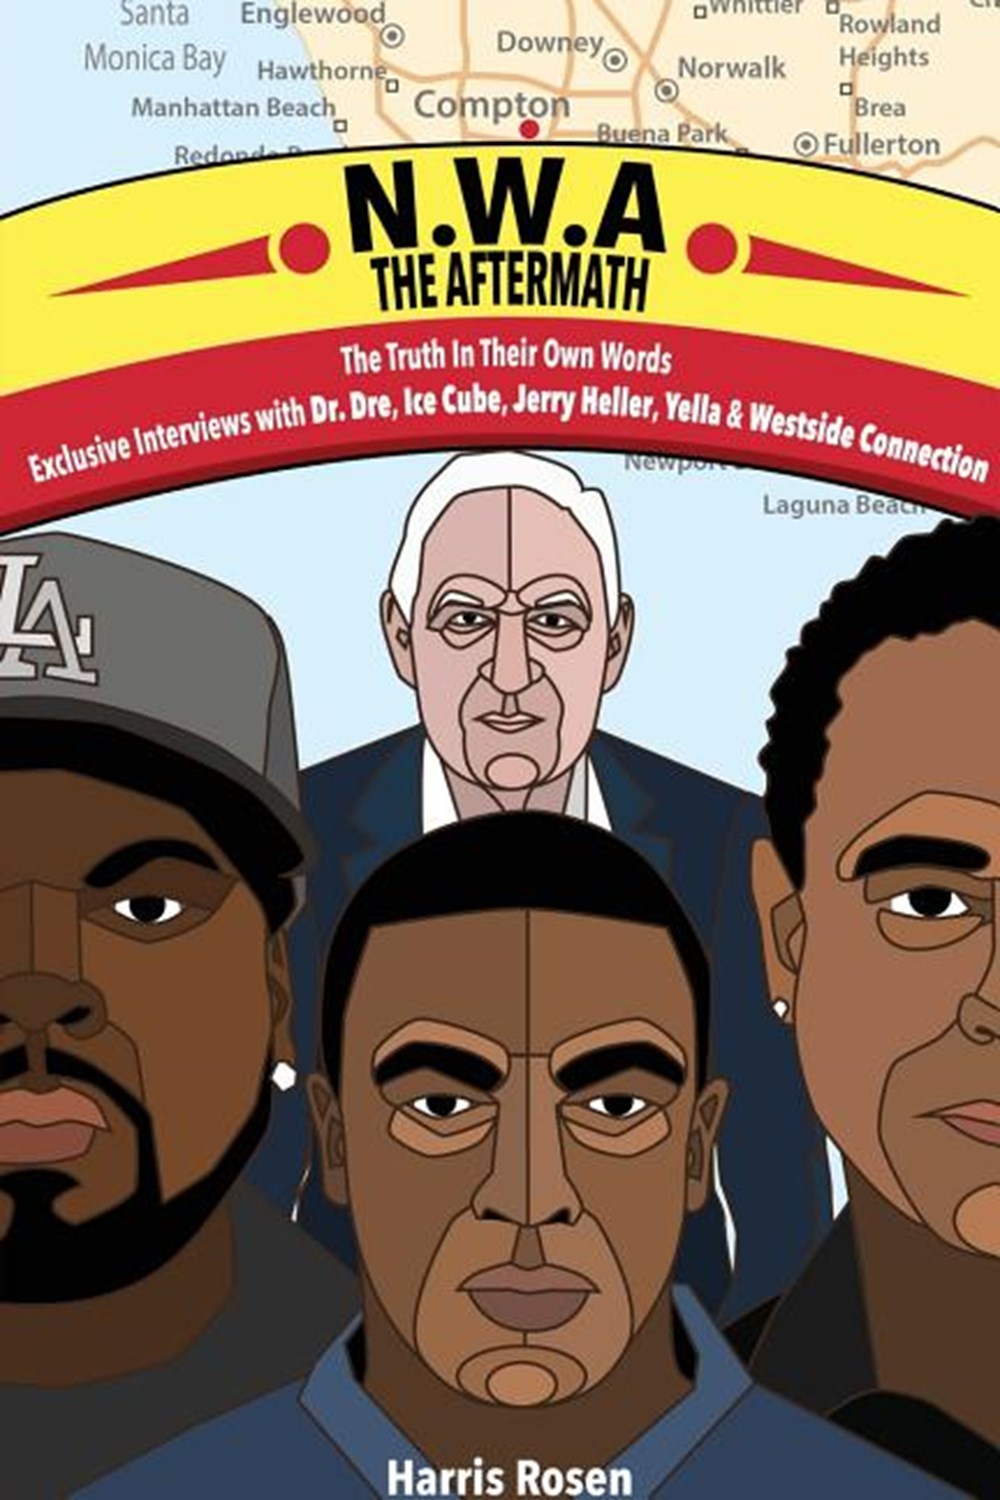 N.W.a: The Aftermath: Exclusive Interviews with Dr. Dre, Ice Cube, Jerry Heller, Yella & Westside Co